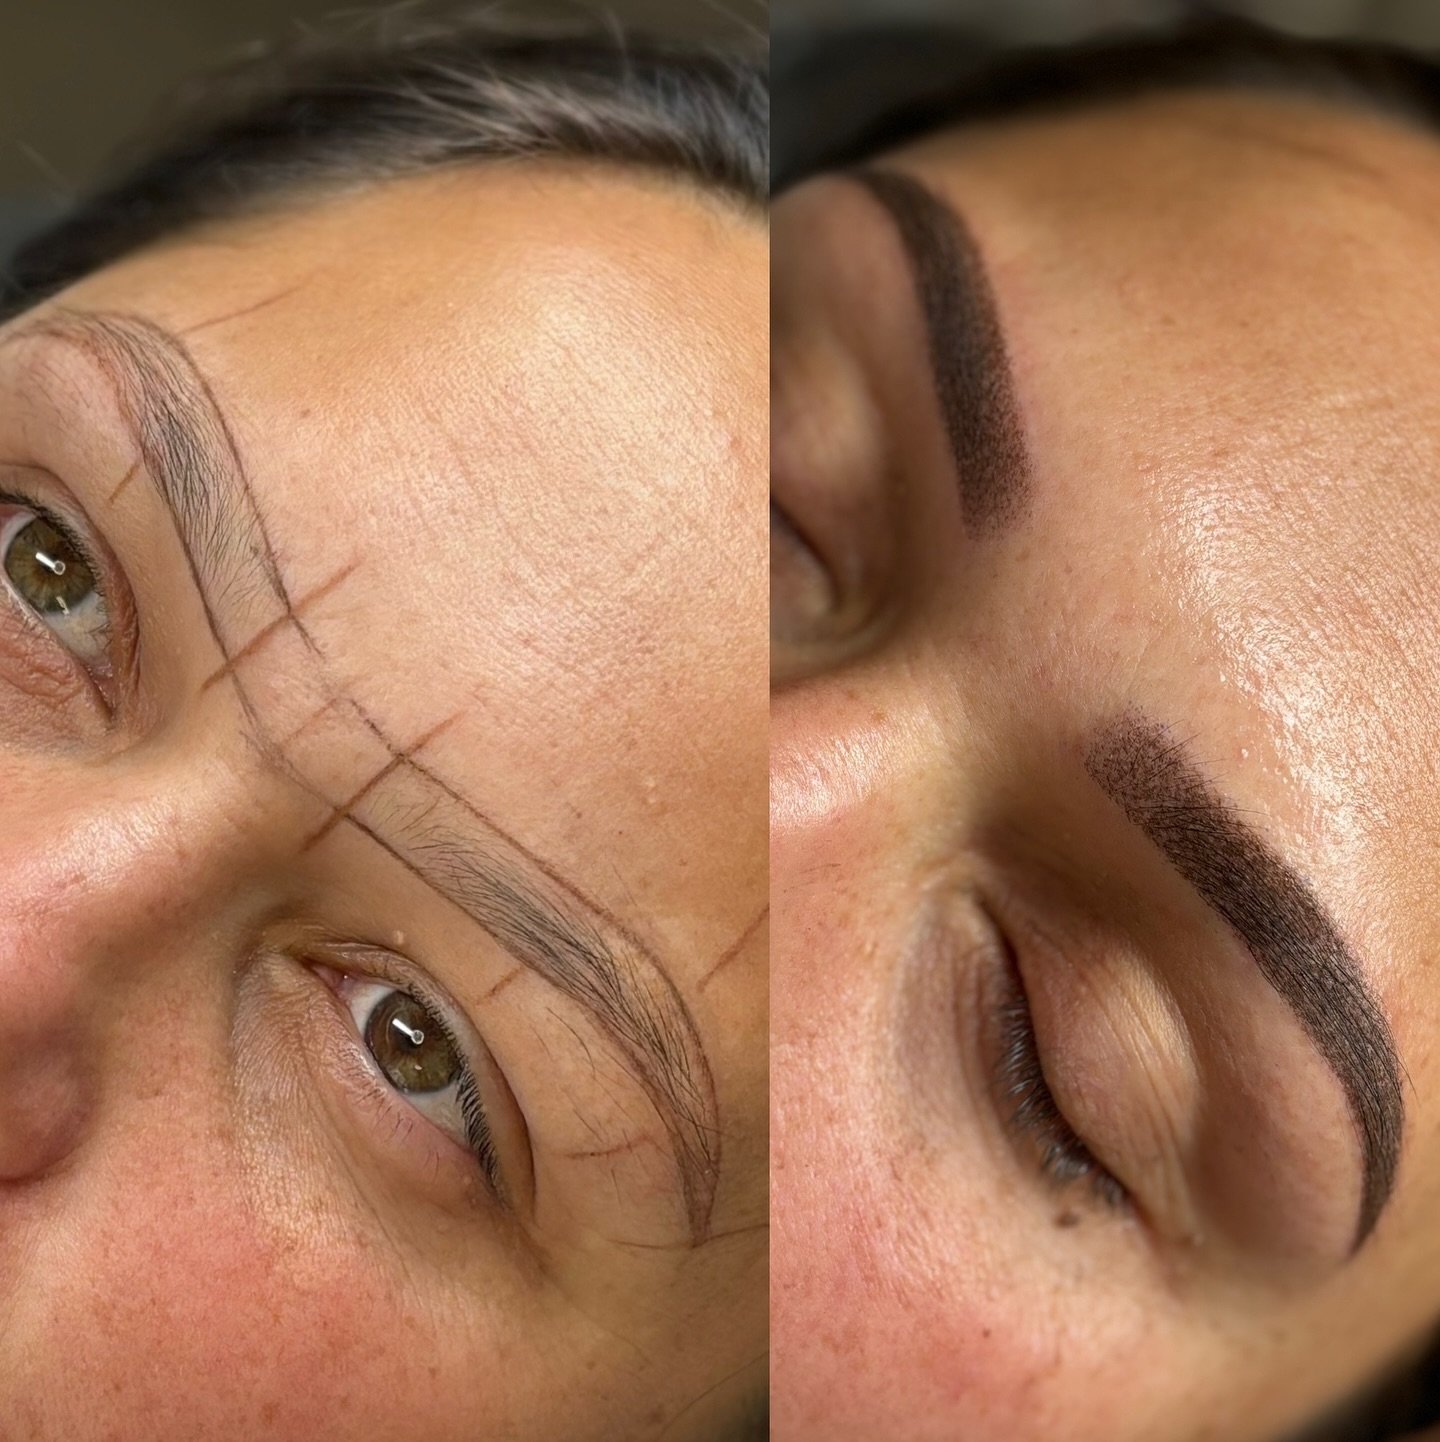 Microblading not your style? No bother, we also offer powder and ombr&eacute; brows! Introductory special now LIVE! $300 for 2 sessions (usually $630) - ends MAY 1st!! 🗓️💸💰